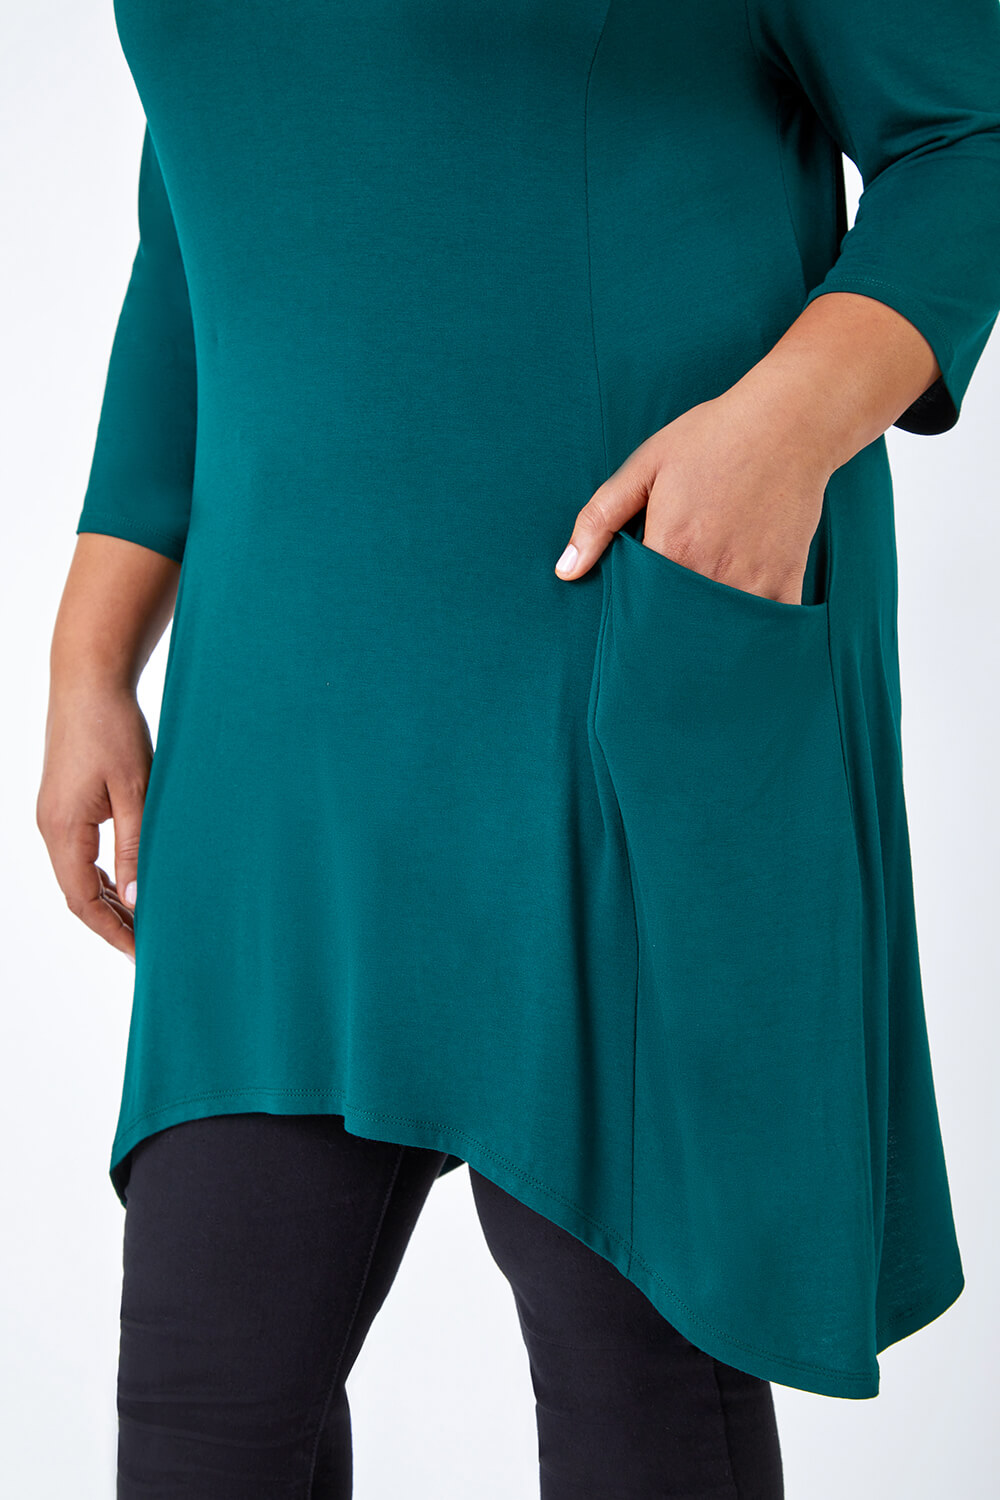 Forest  Curve Pocket Detail Stretch Tunic Top, Image 5 of 5